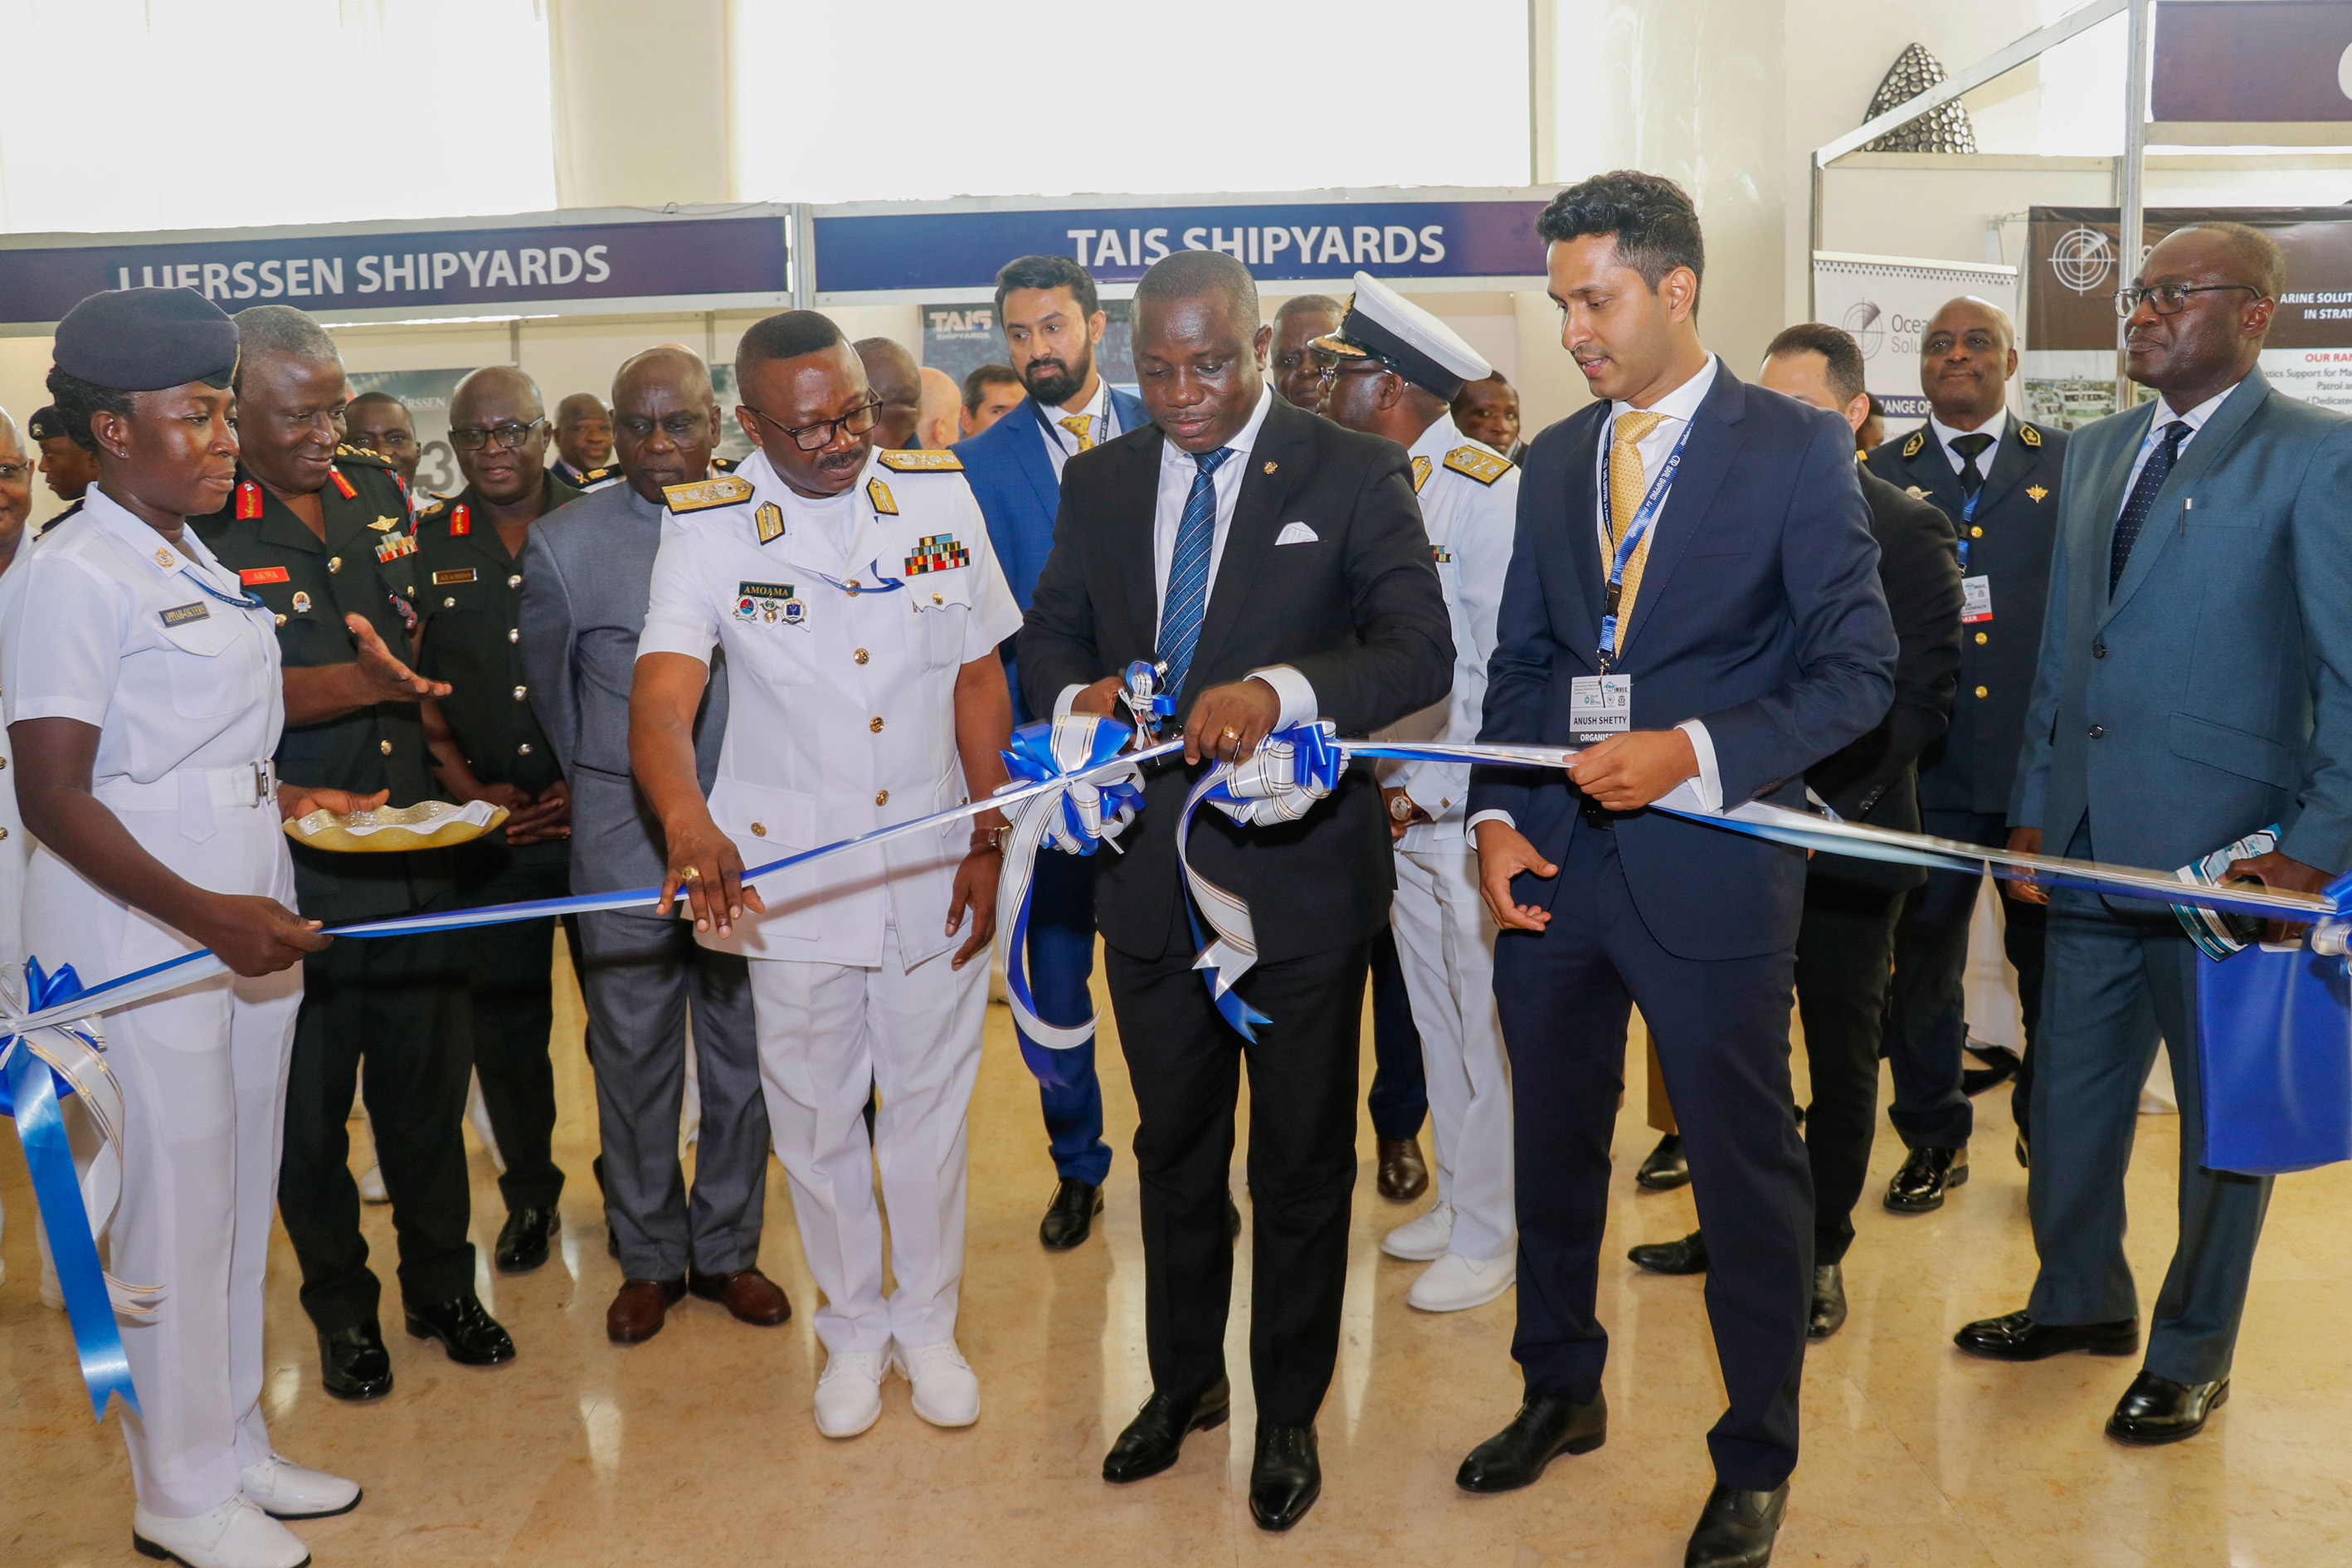 International Naval and Air Forces Leaders to Gather at the 3rd Edition of The International Maritime Defence Exhibition and Conference